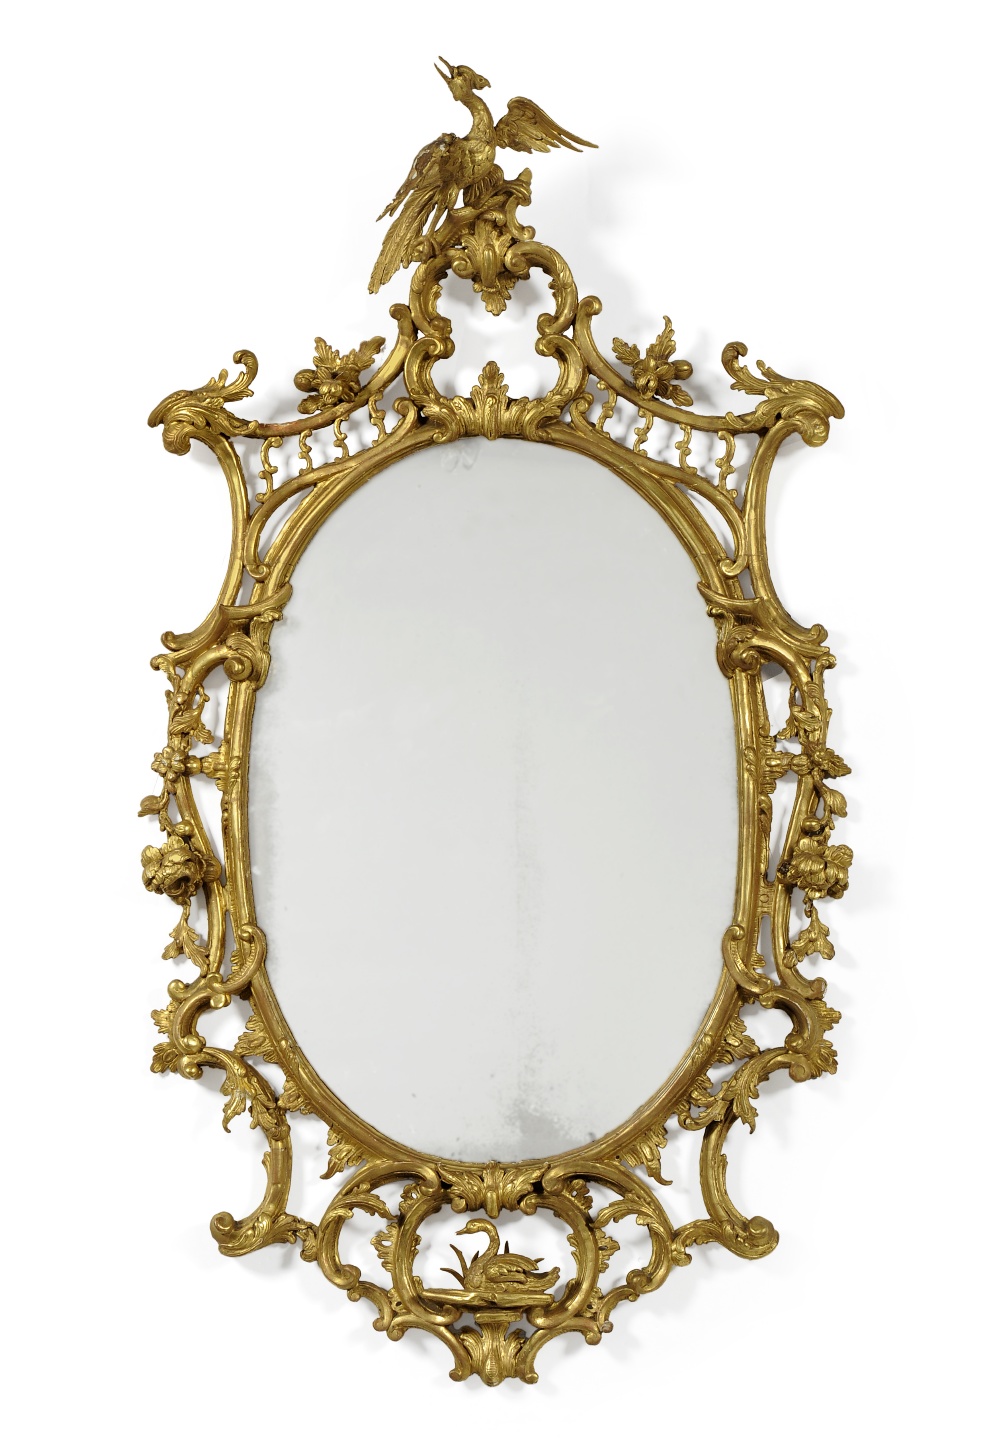 A George III Giltwood and Gesso Looking Glass, in the manner of Thomas Chippendale, the oval plate